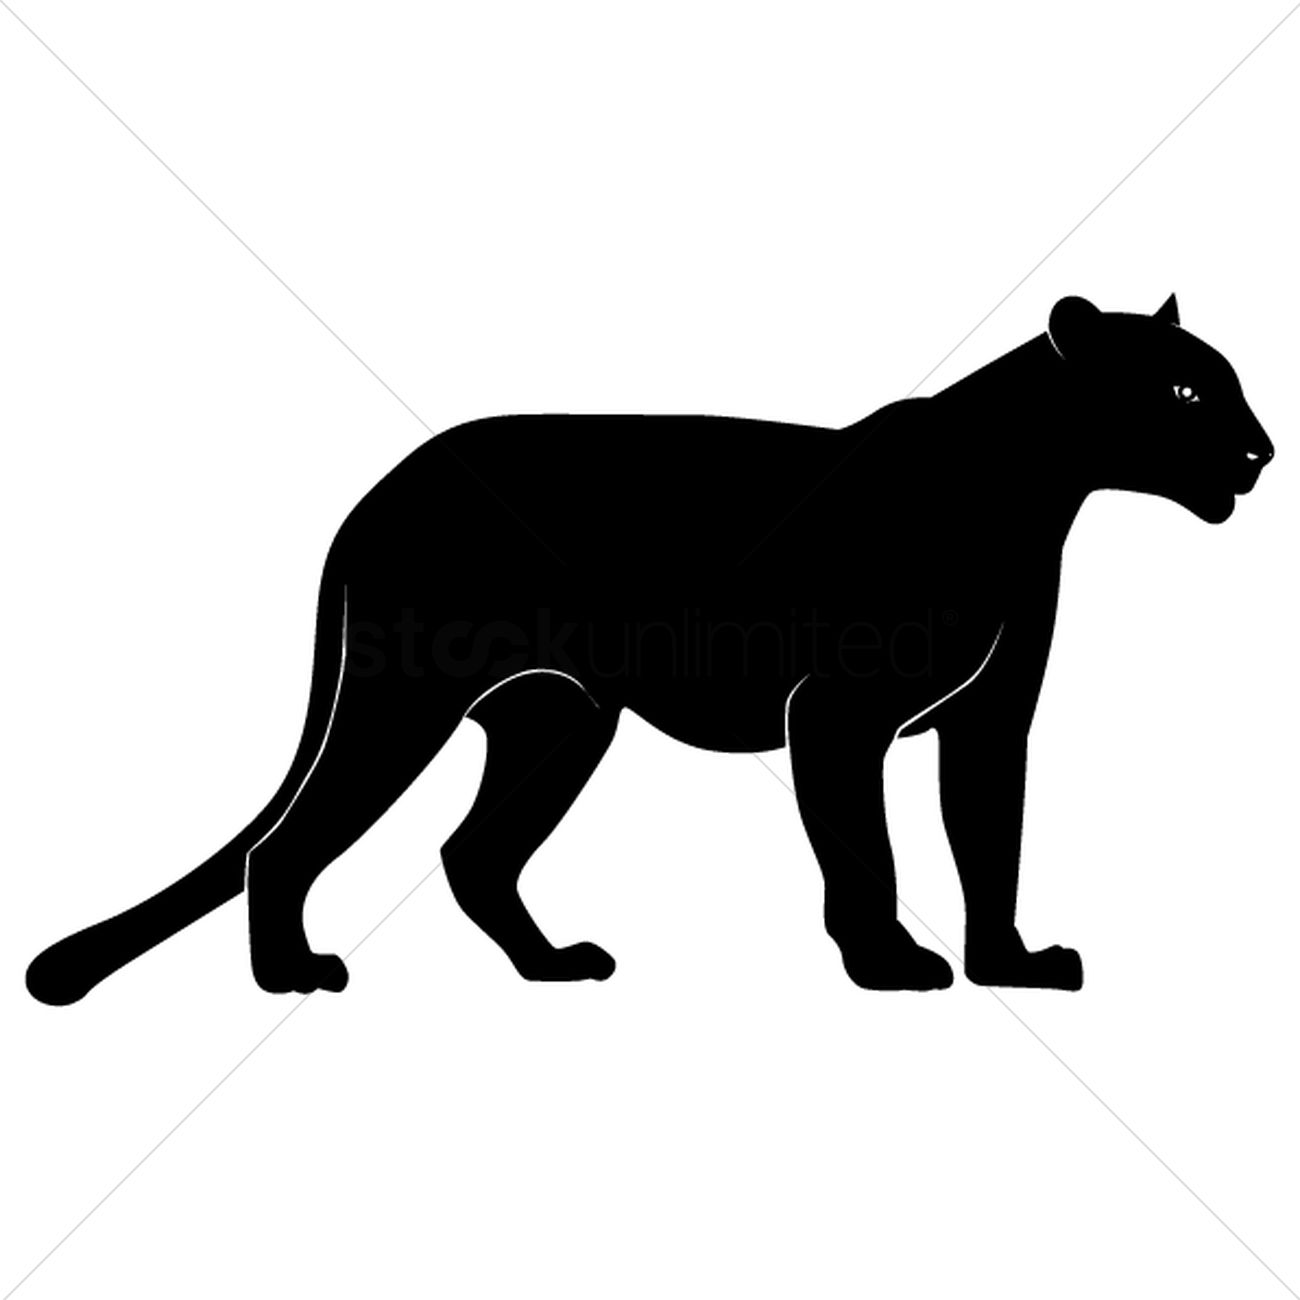 Free Silhouette of cheetah Vector Image